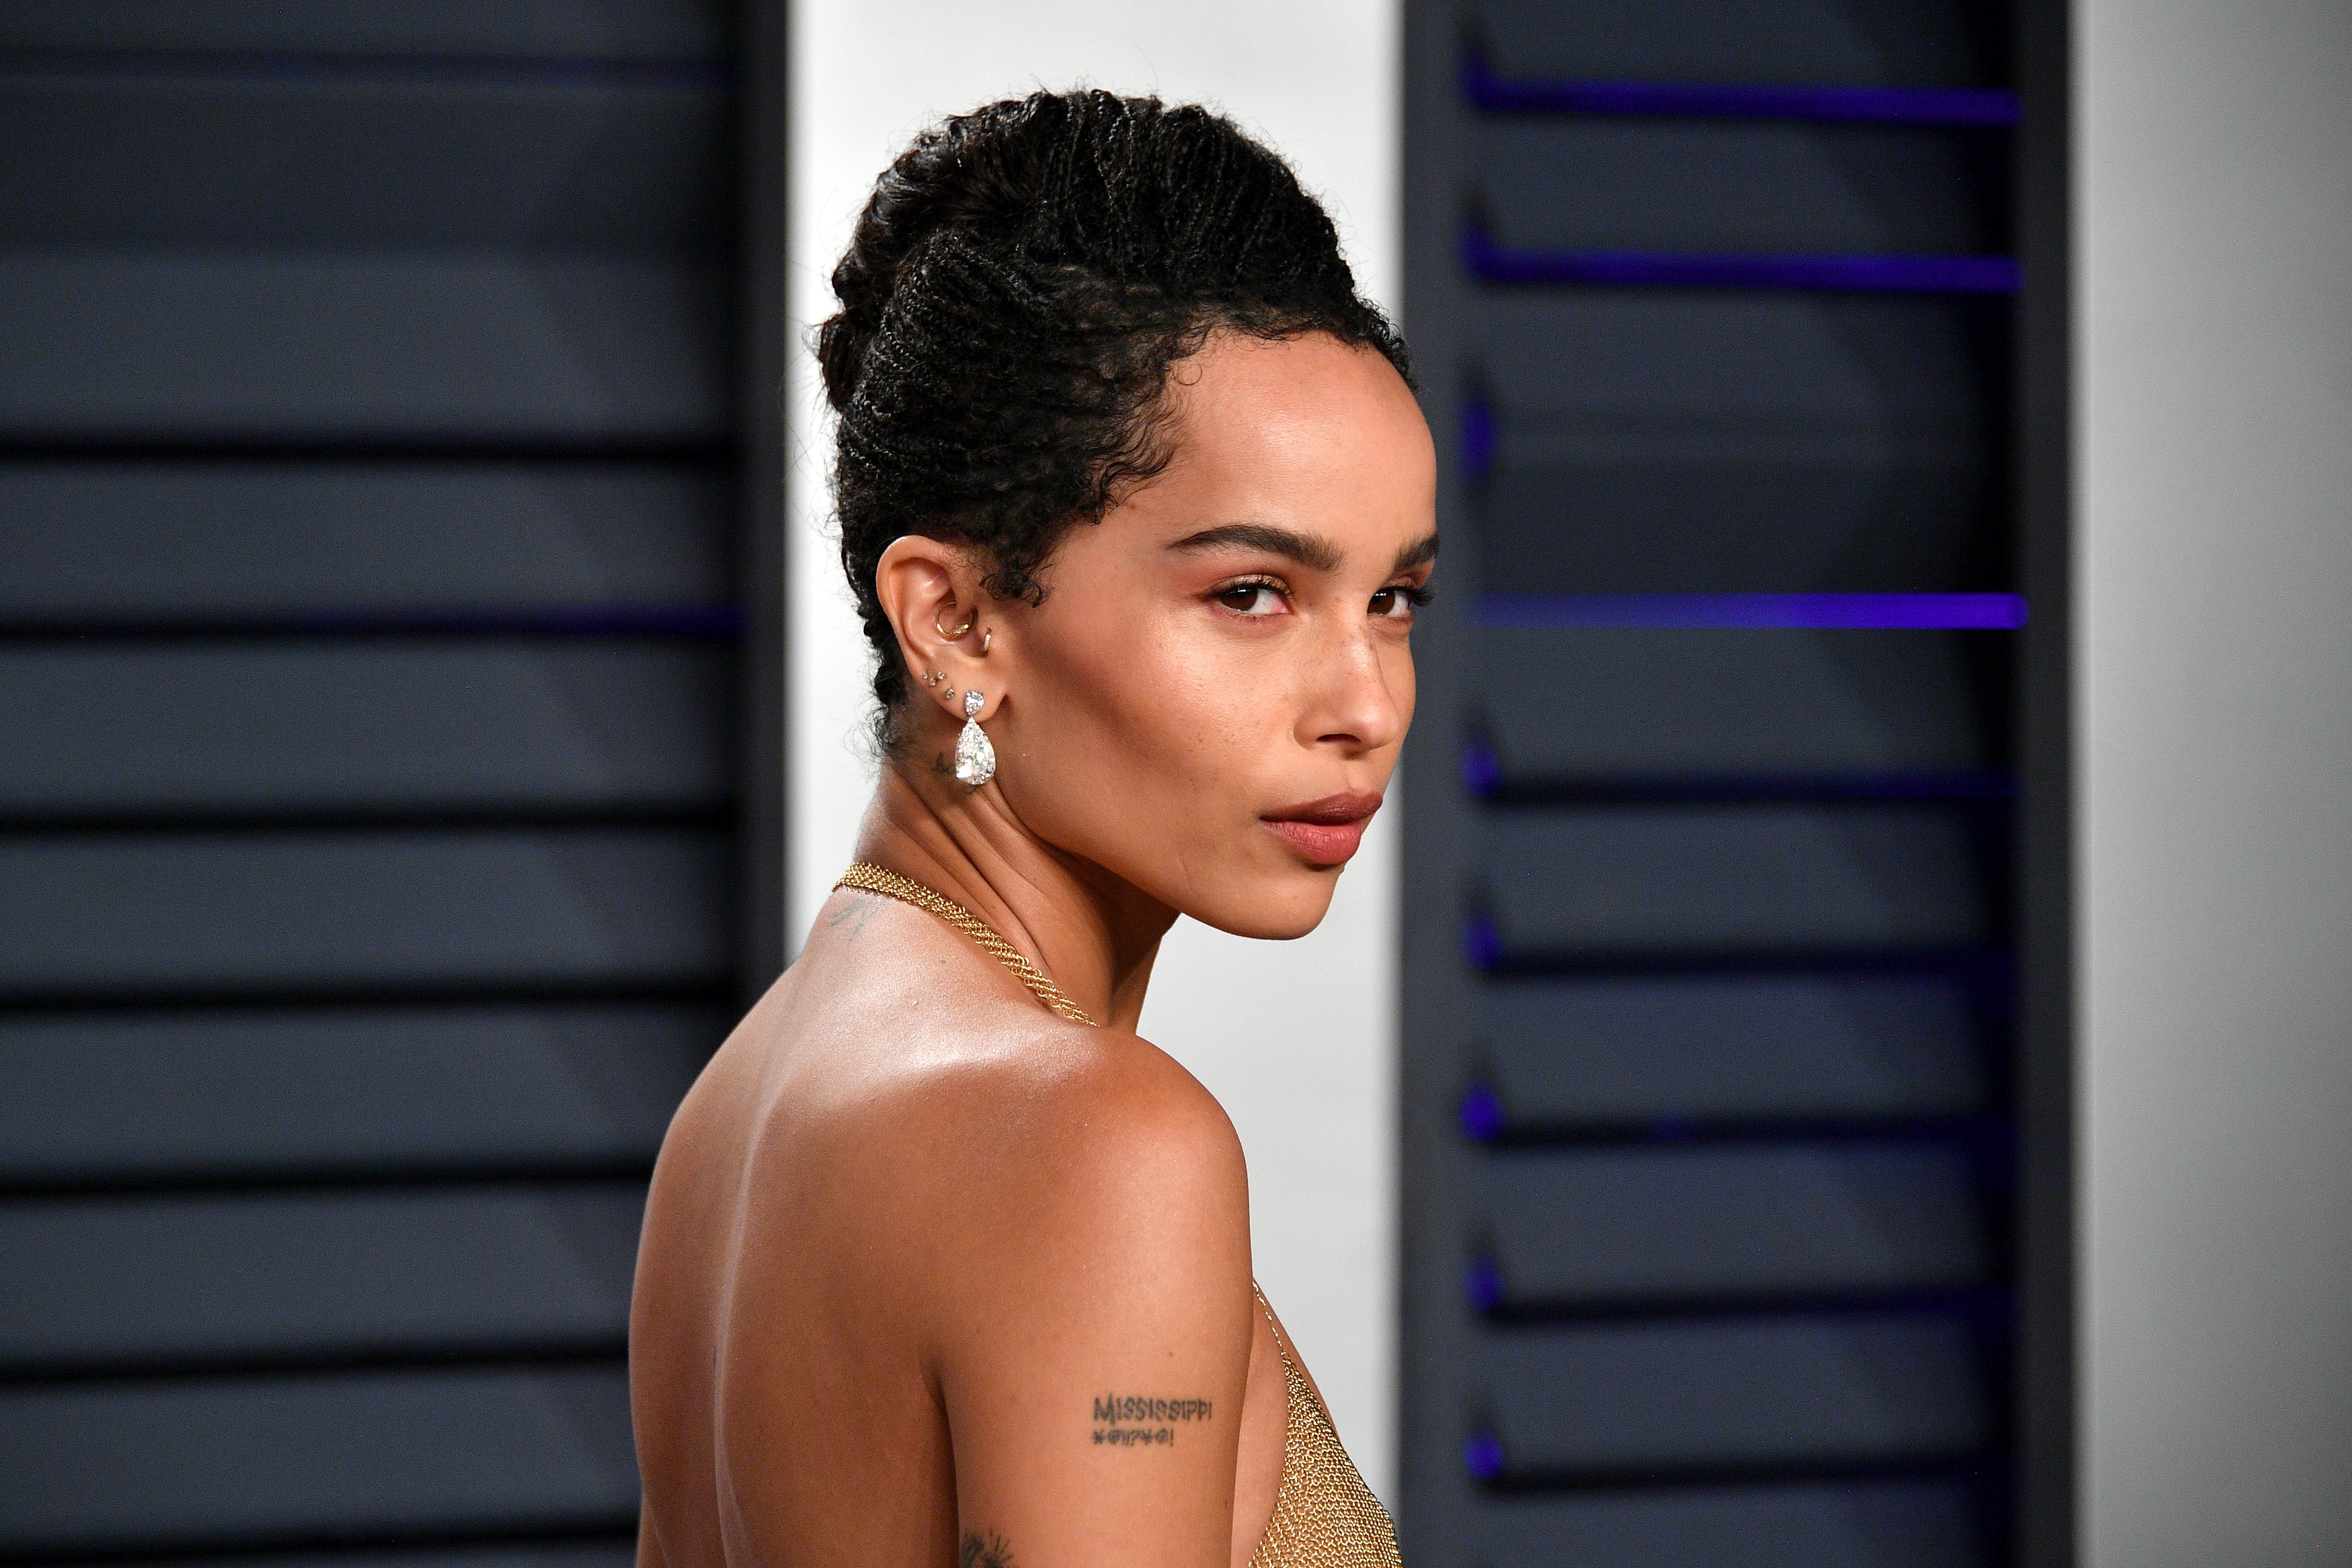 Zoe Kravitz during the 2019 Vanity Fair Oscar Party at Wallis Annenberg Center for the Performing Arts on February 24, 2019, in Beverly Hills, California. | Source: Getty Images